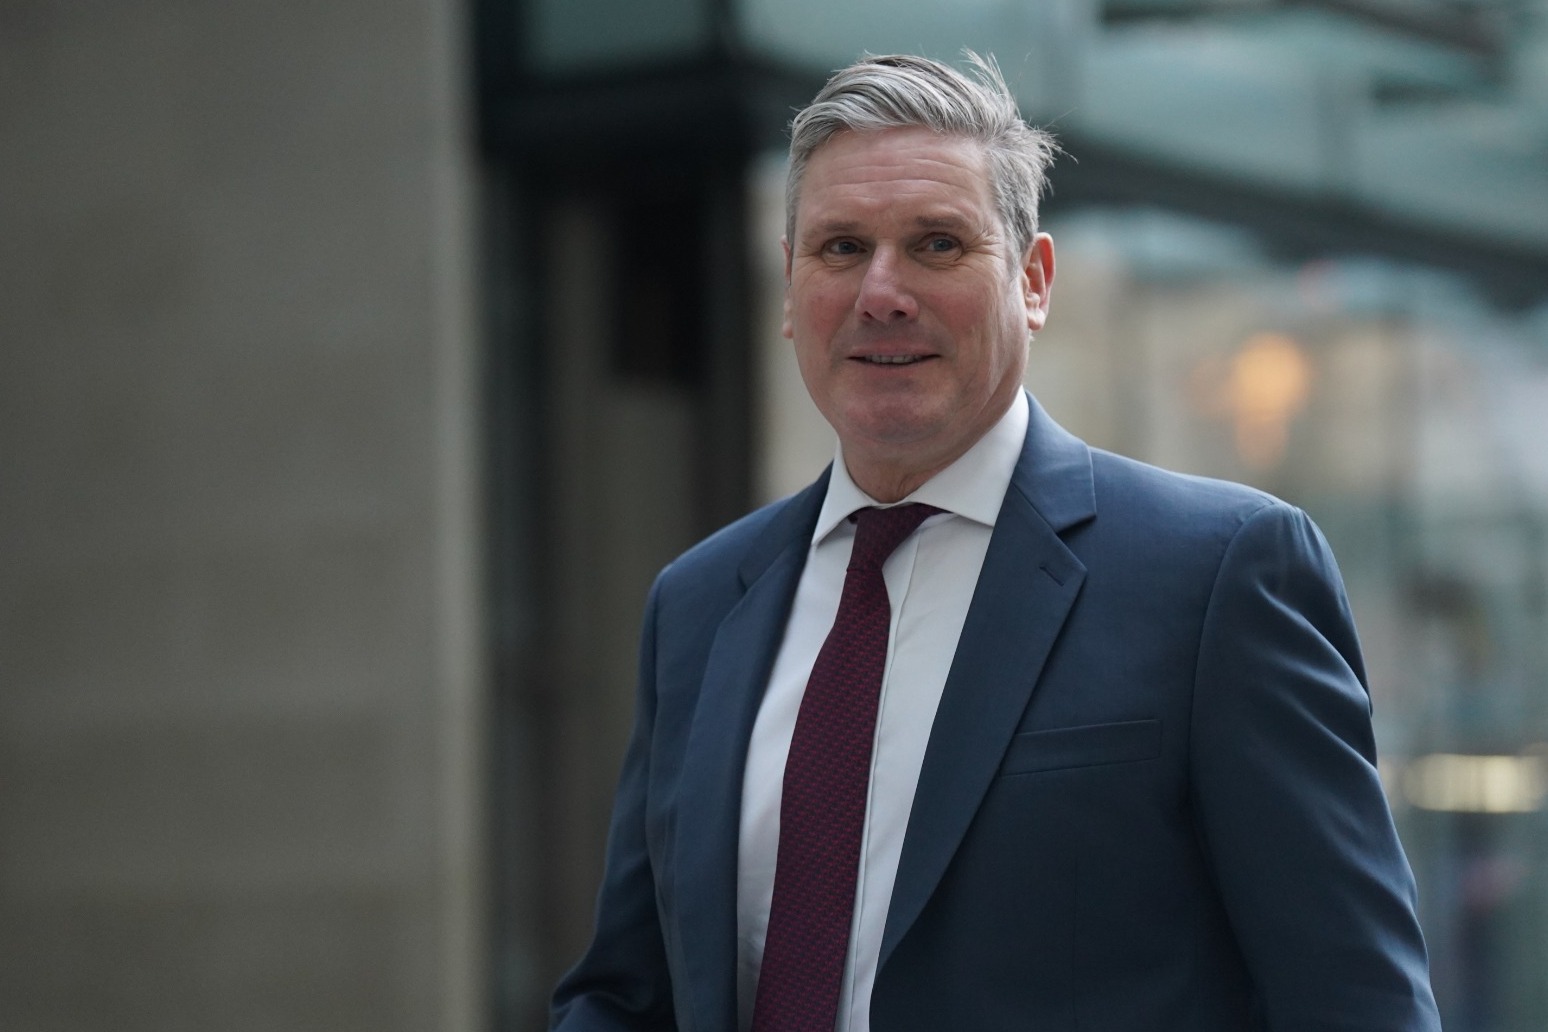 Sir Keir Starmer says 16 too young as he speaks of ‘concern’ over new Scotland gender law 